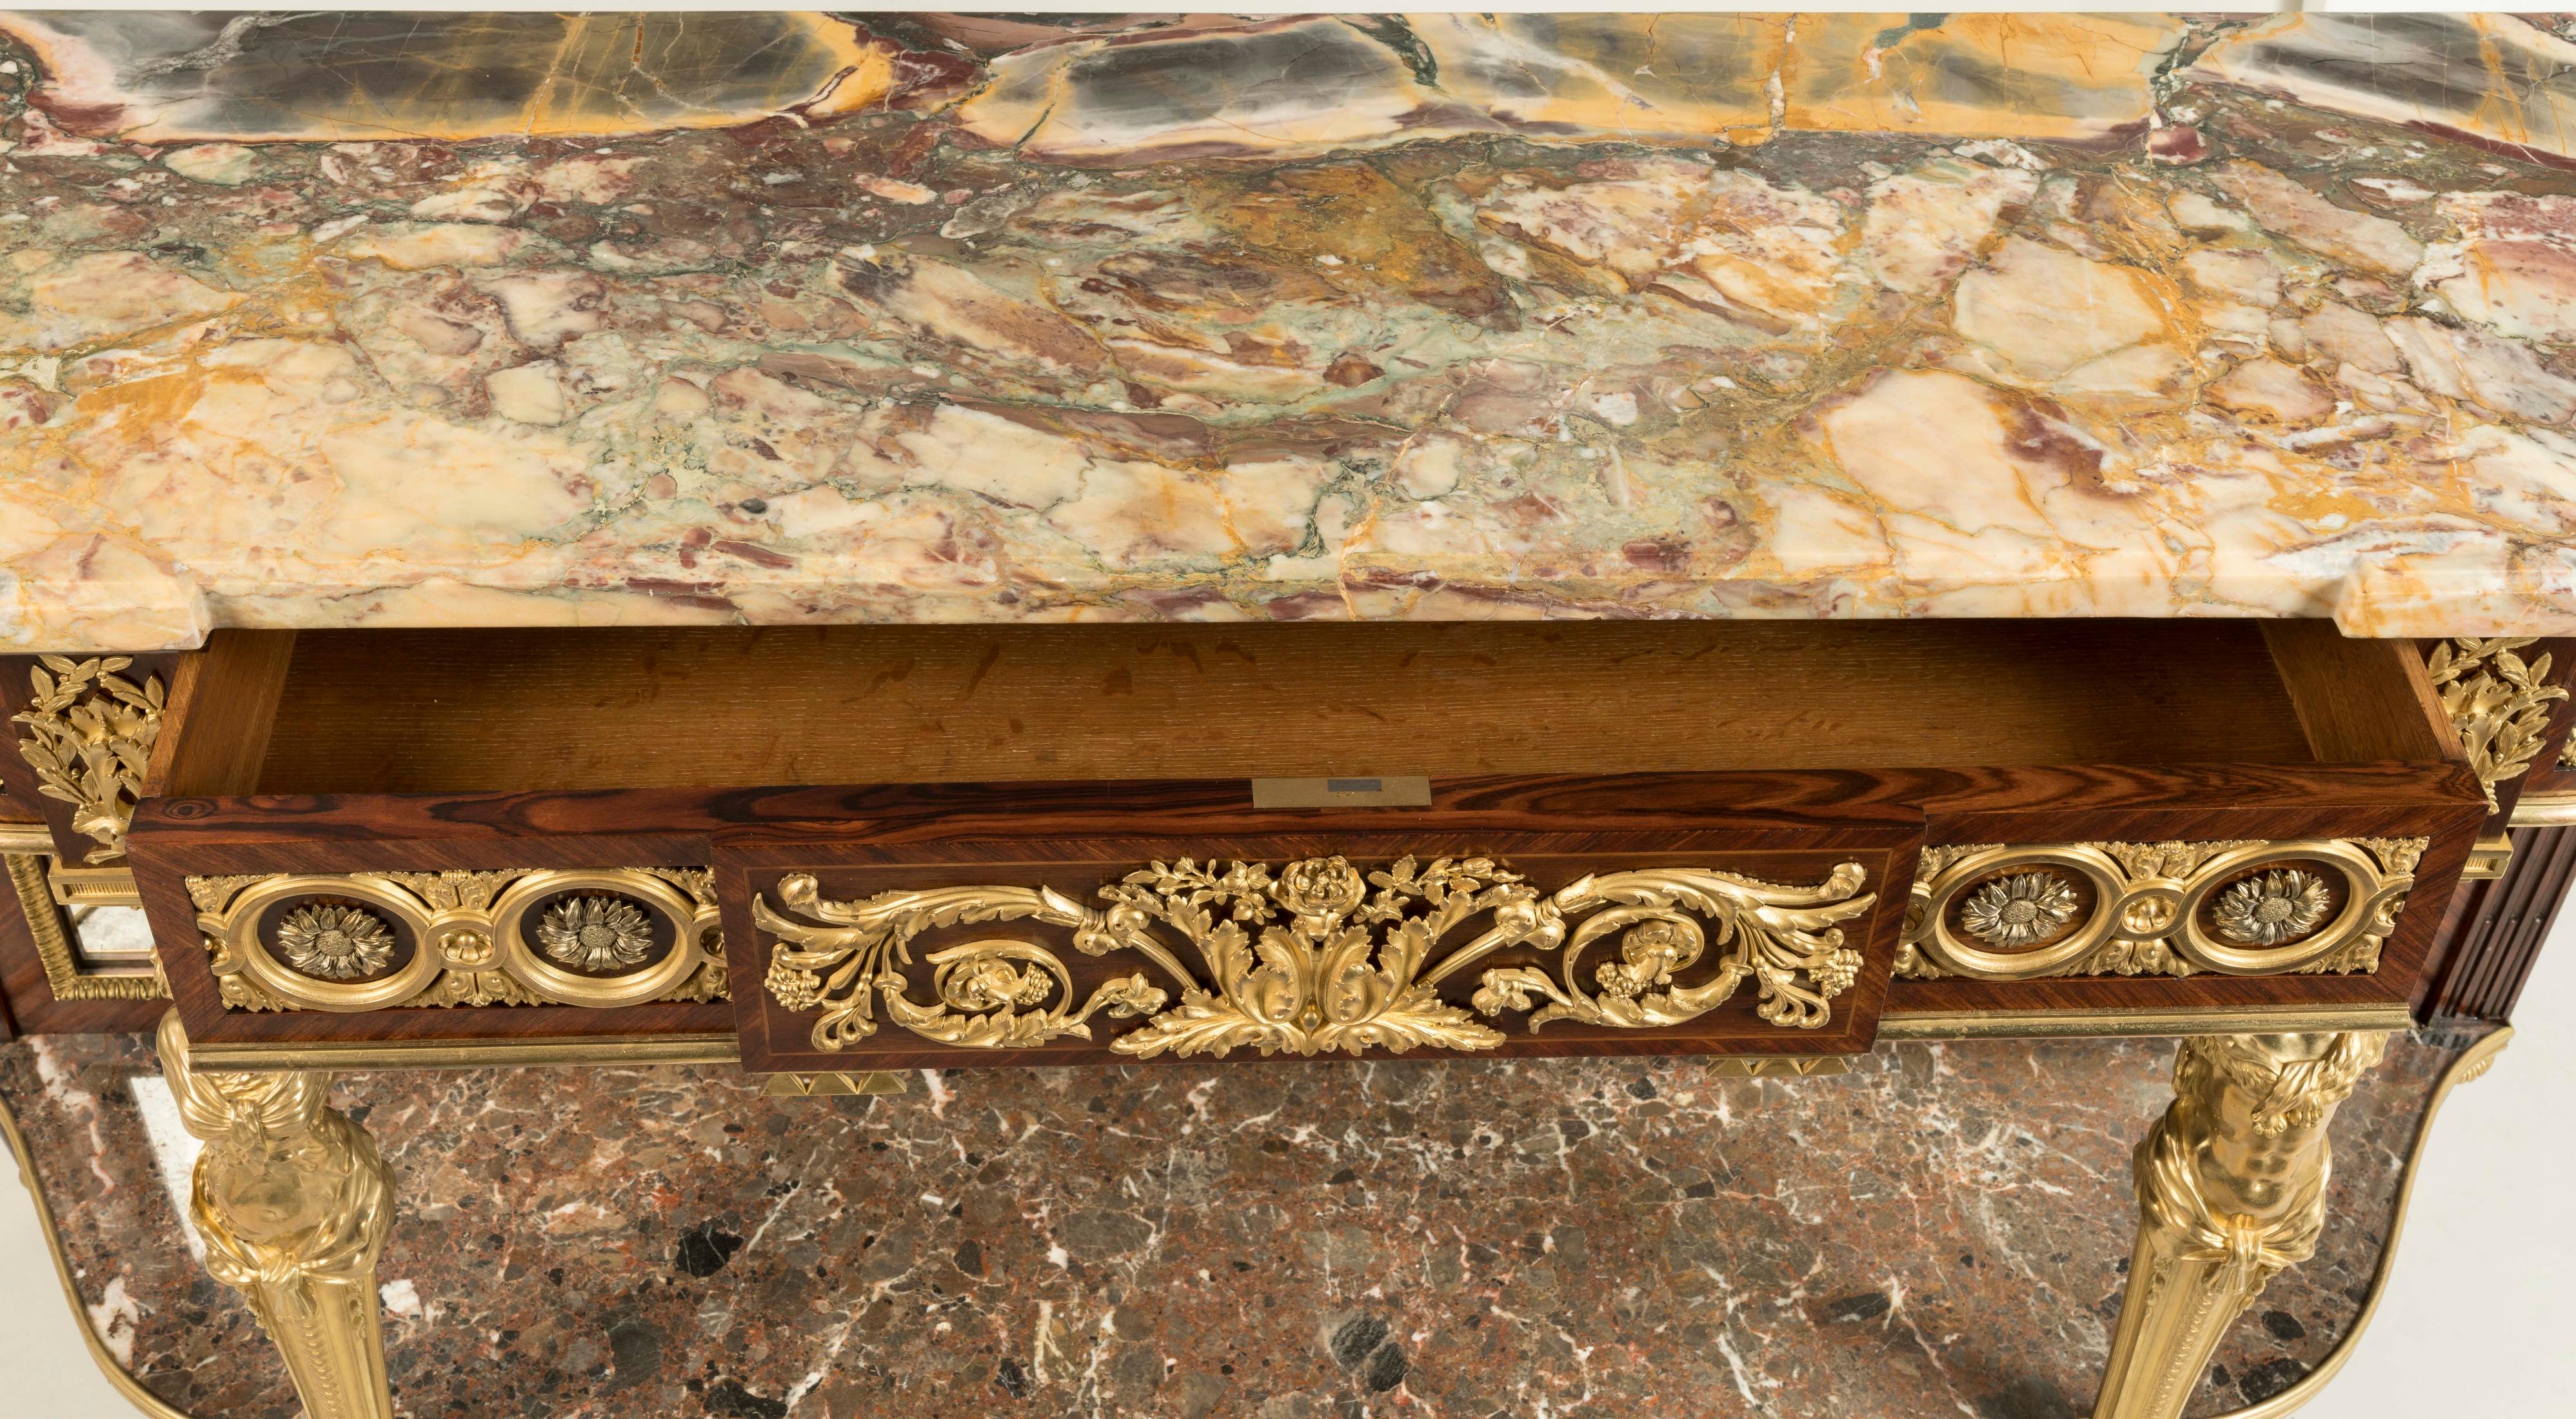 19th Century French Ormolu-Mounted Kingwood Console Table in the Louis XVI Style For Sale 3